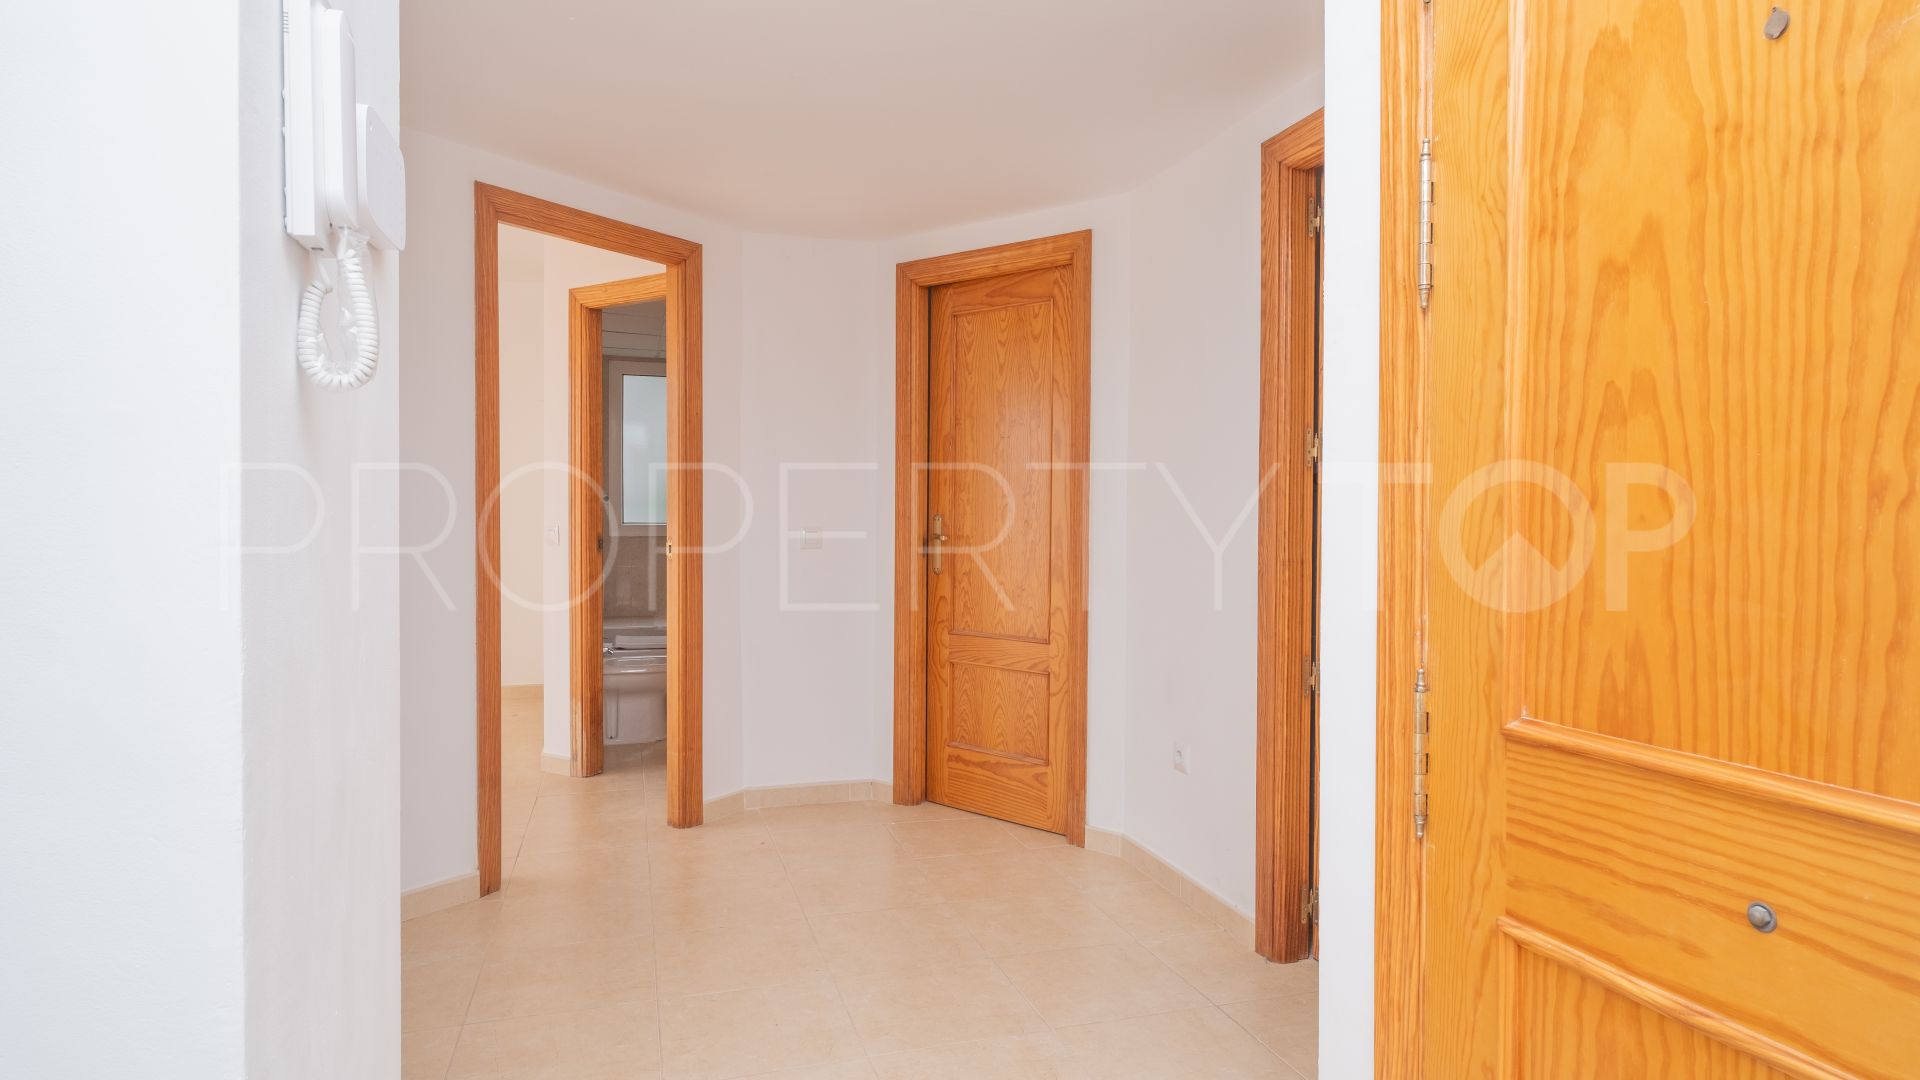 For sale duplex penthouse with 3 bedrooms in Selwo